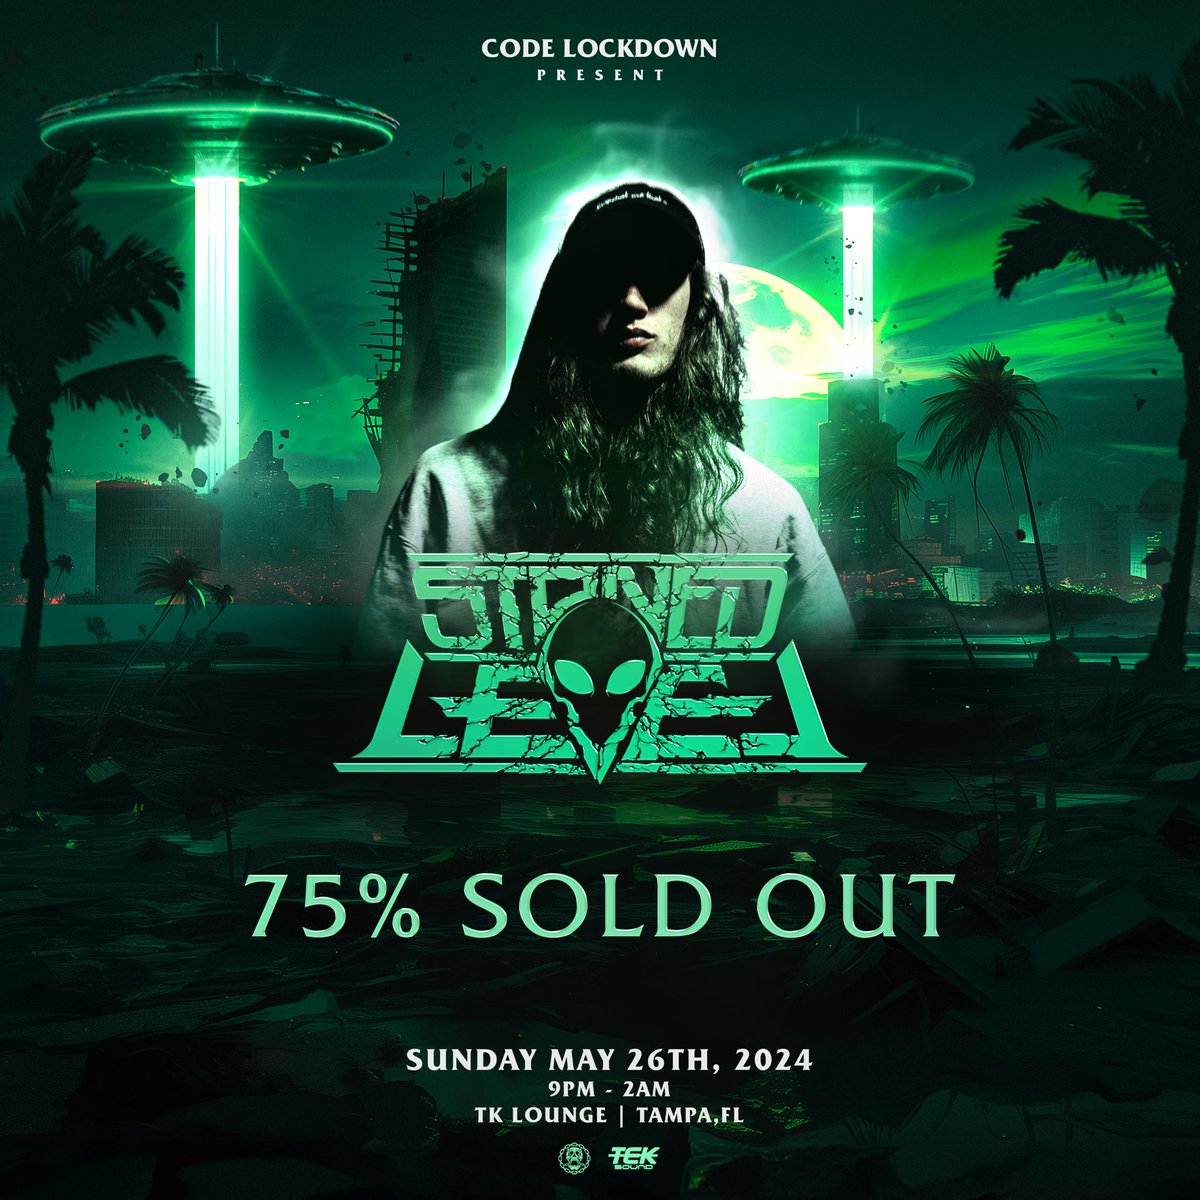 Ps. We are over 75% SOLD OUT! Don't wait till it's too late! Limited Tier 2 tickets remain! Bit.ly/StonedLevel0526